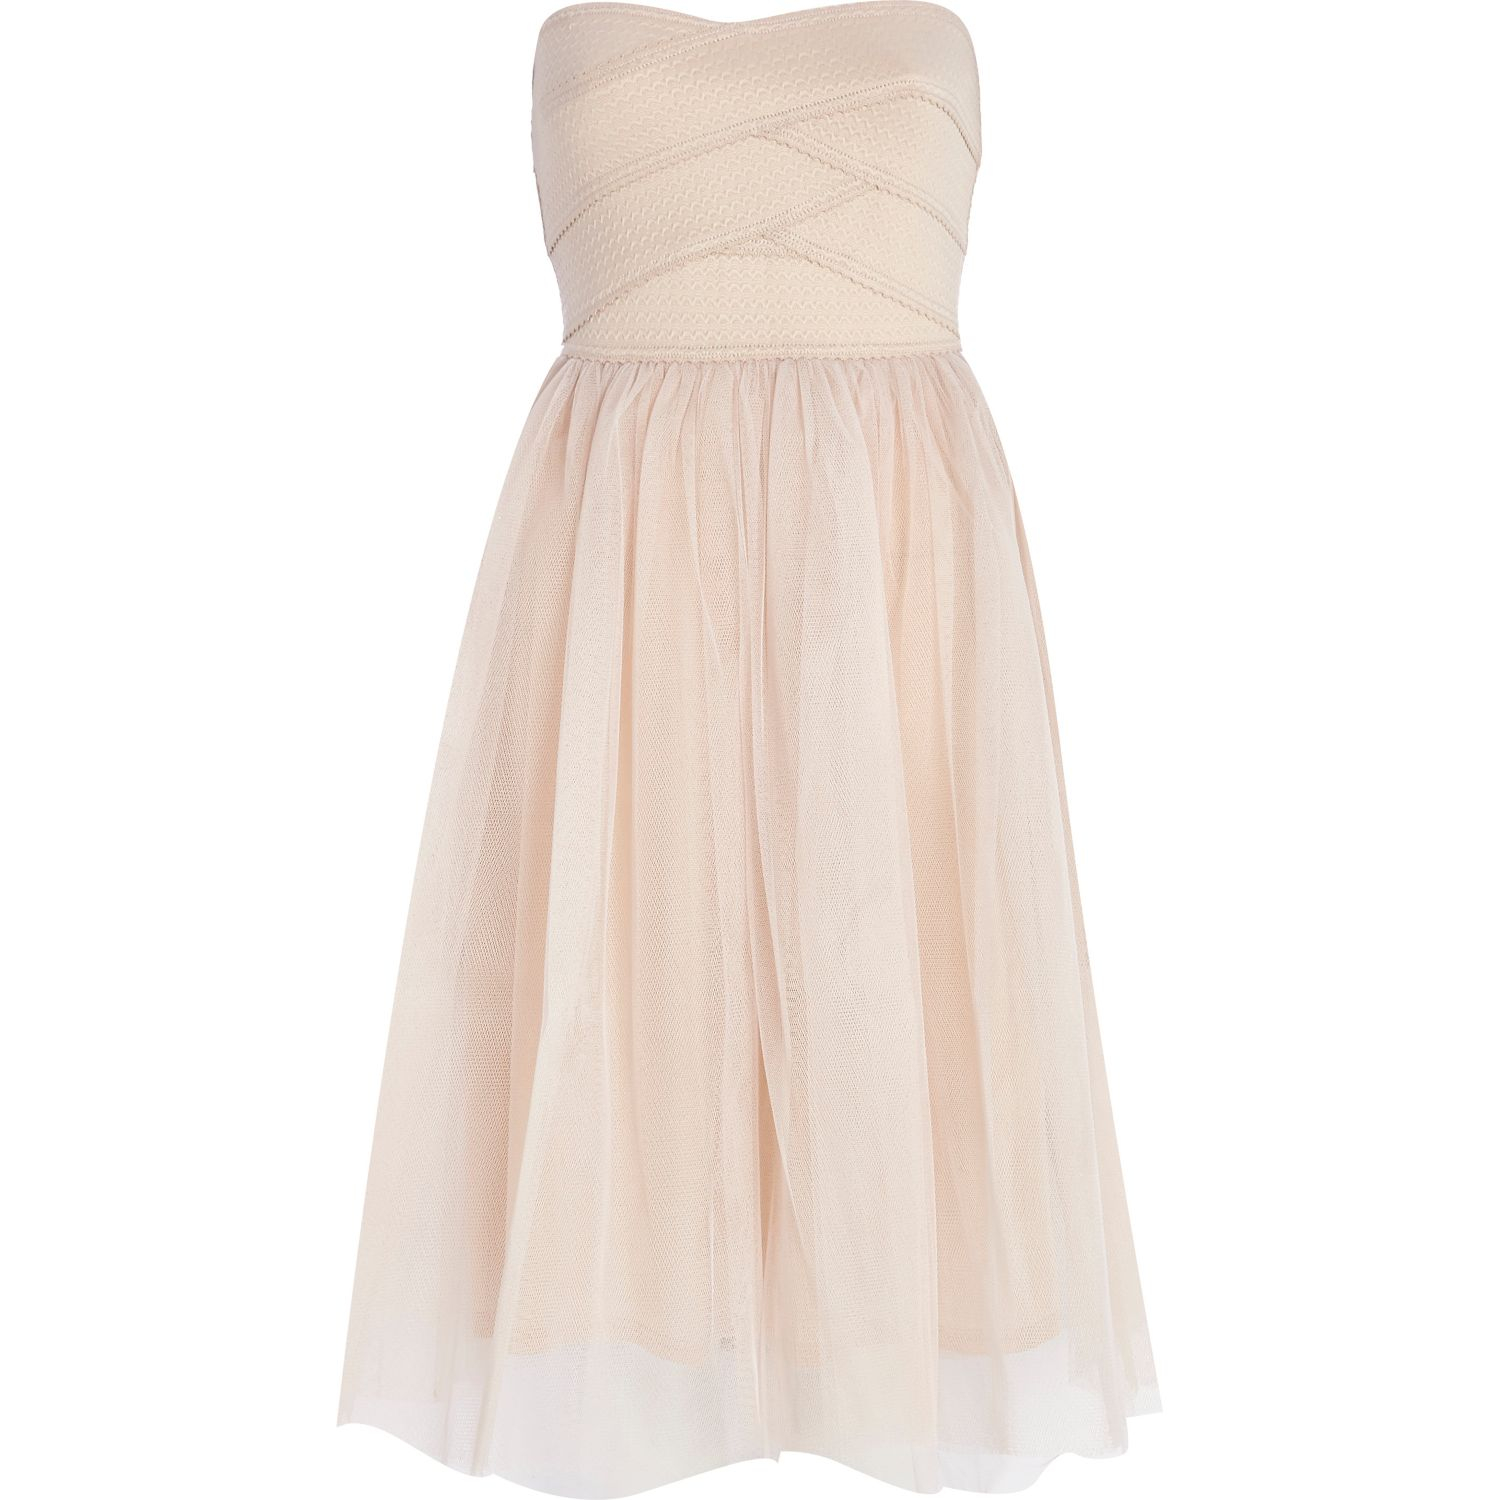 River Island Prom Dresses Uk And Perfect Choices